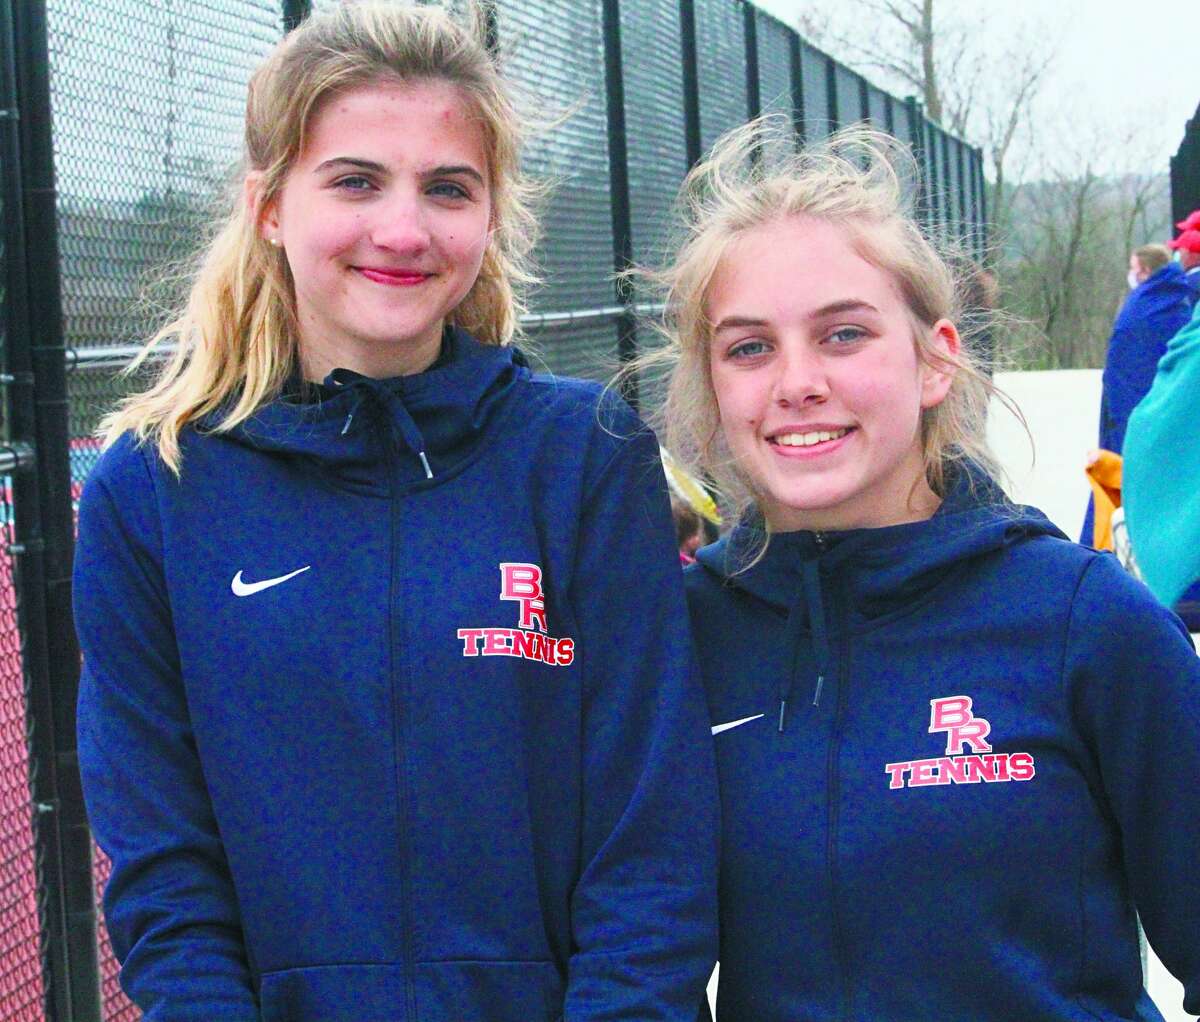 Cortney Myers (right) and Lauren Wilcox have been starring at No. 4 doubles for Big Rapids tennis.